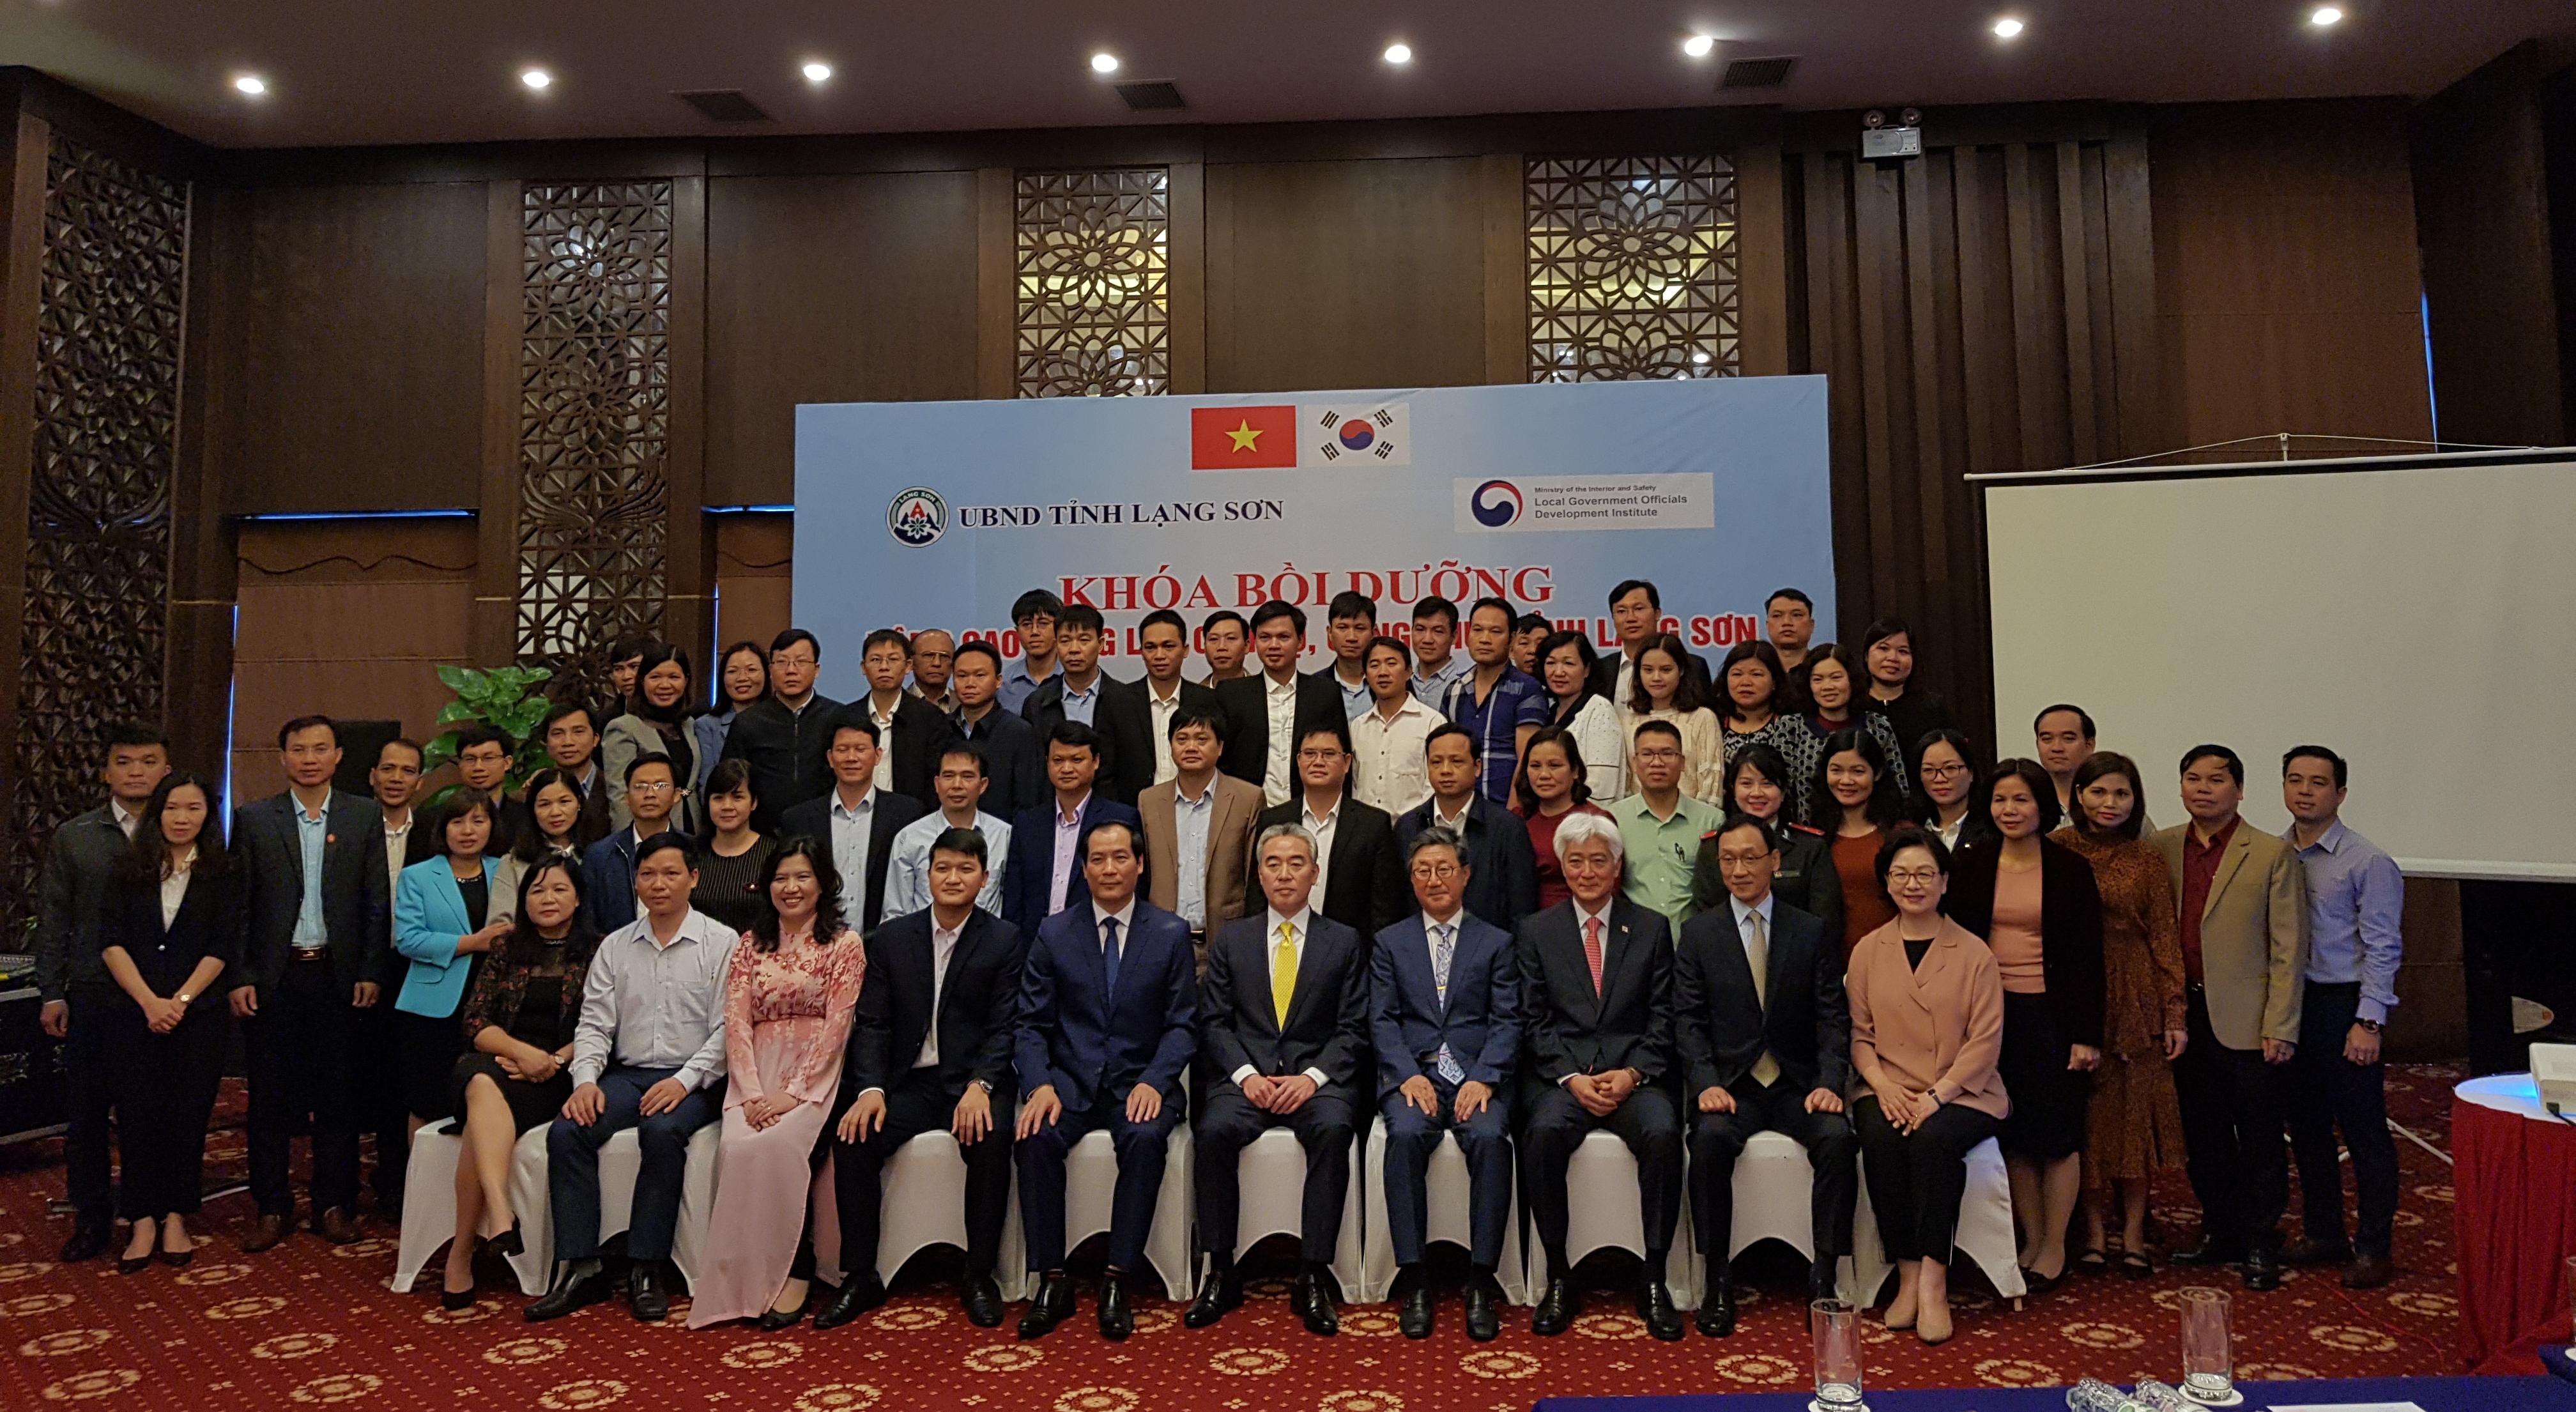 On-site Capacity Building Program for Officials of Lang Son Province 큰 이미지[마우스 클릭 시 창닫기]